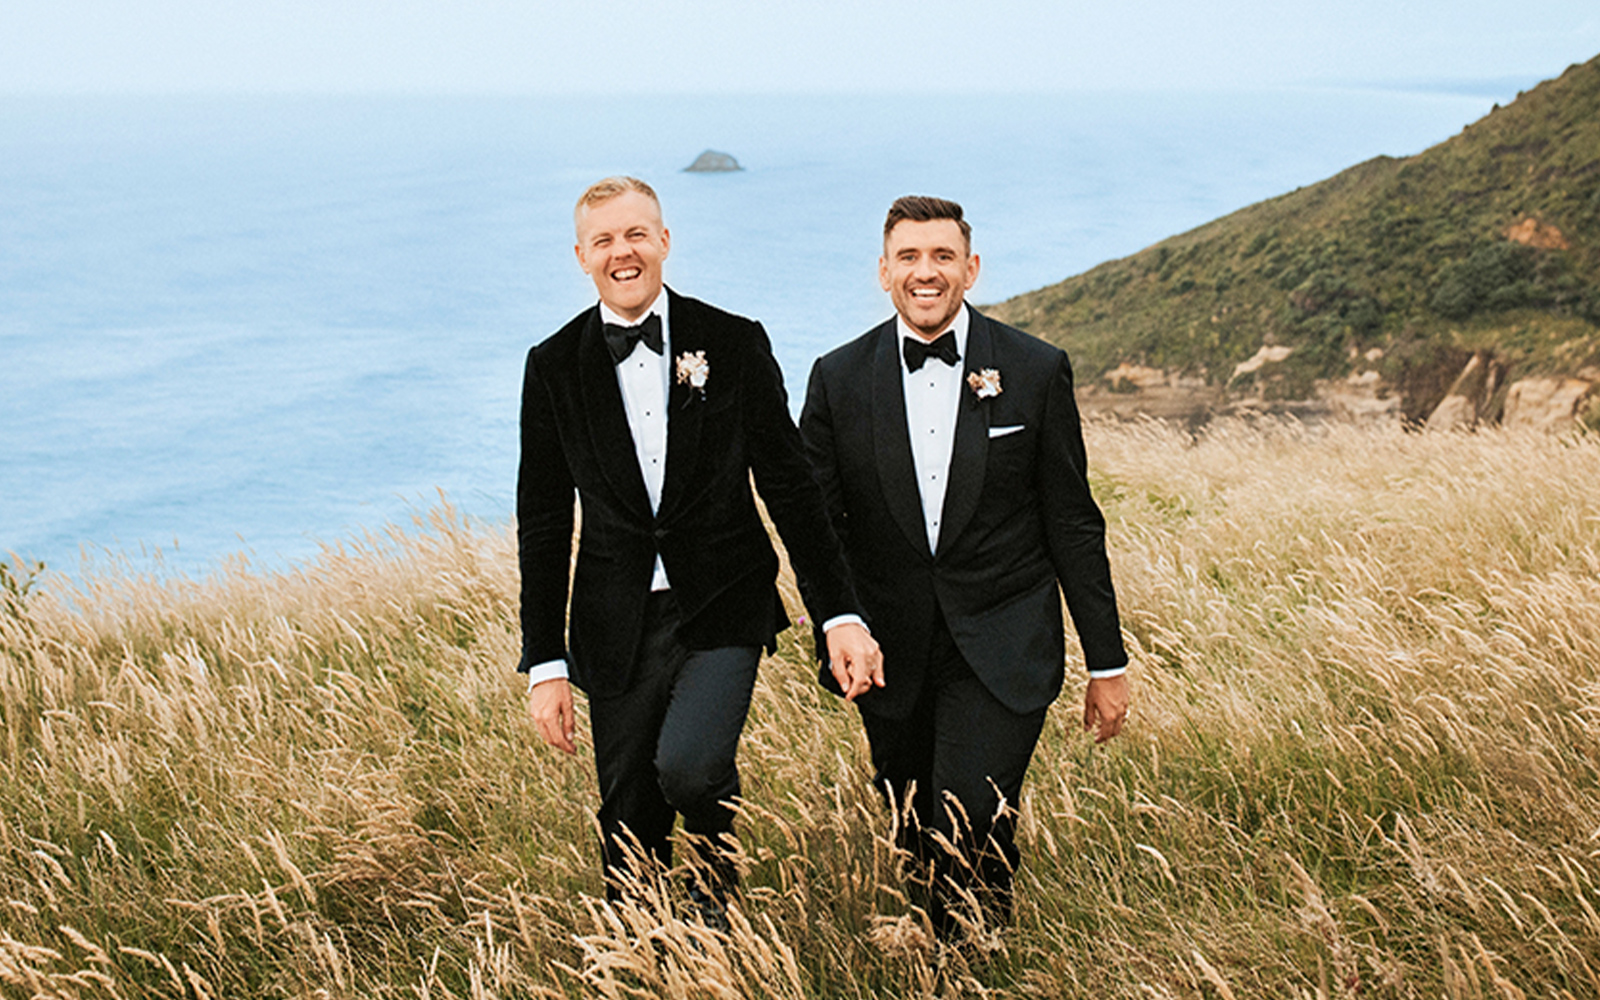 Matty and Ryan’s perfect day ‘It was beyond our wildest dreams’